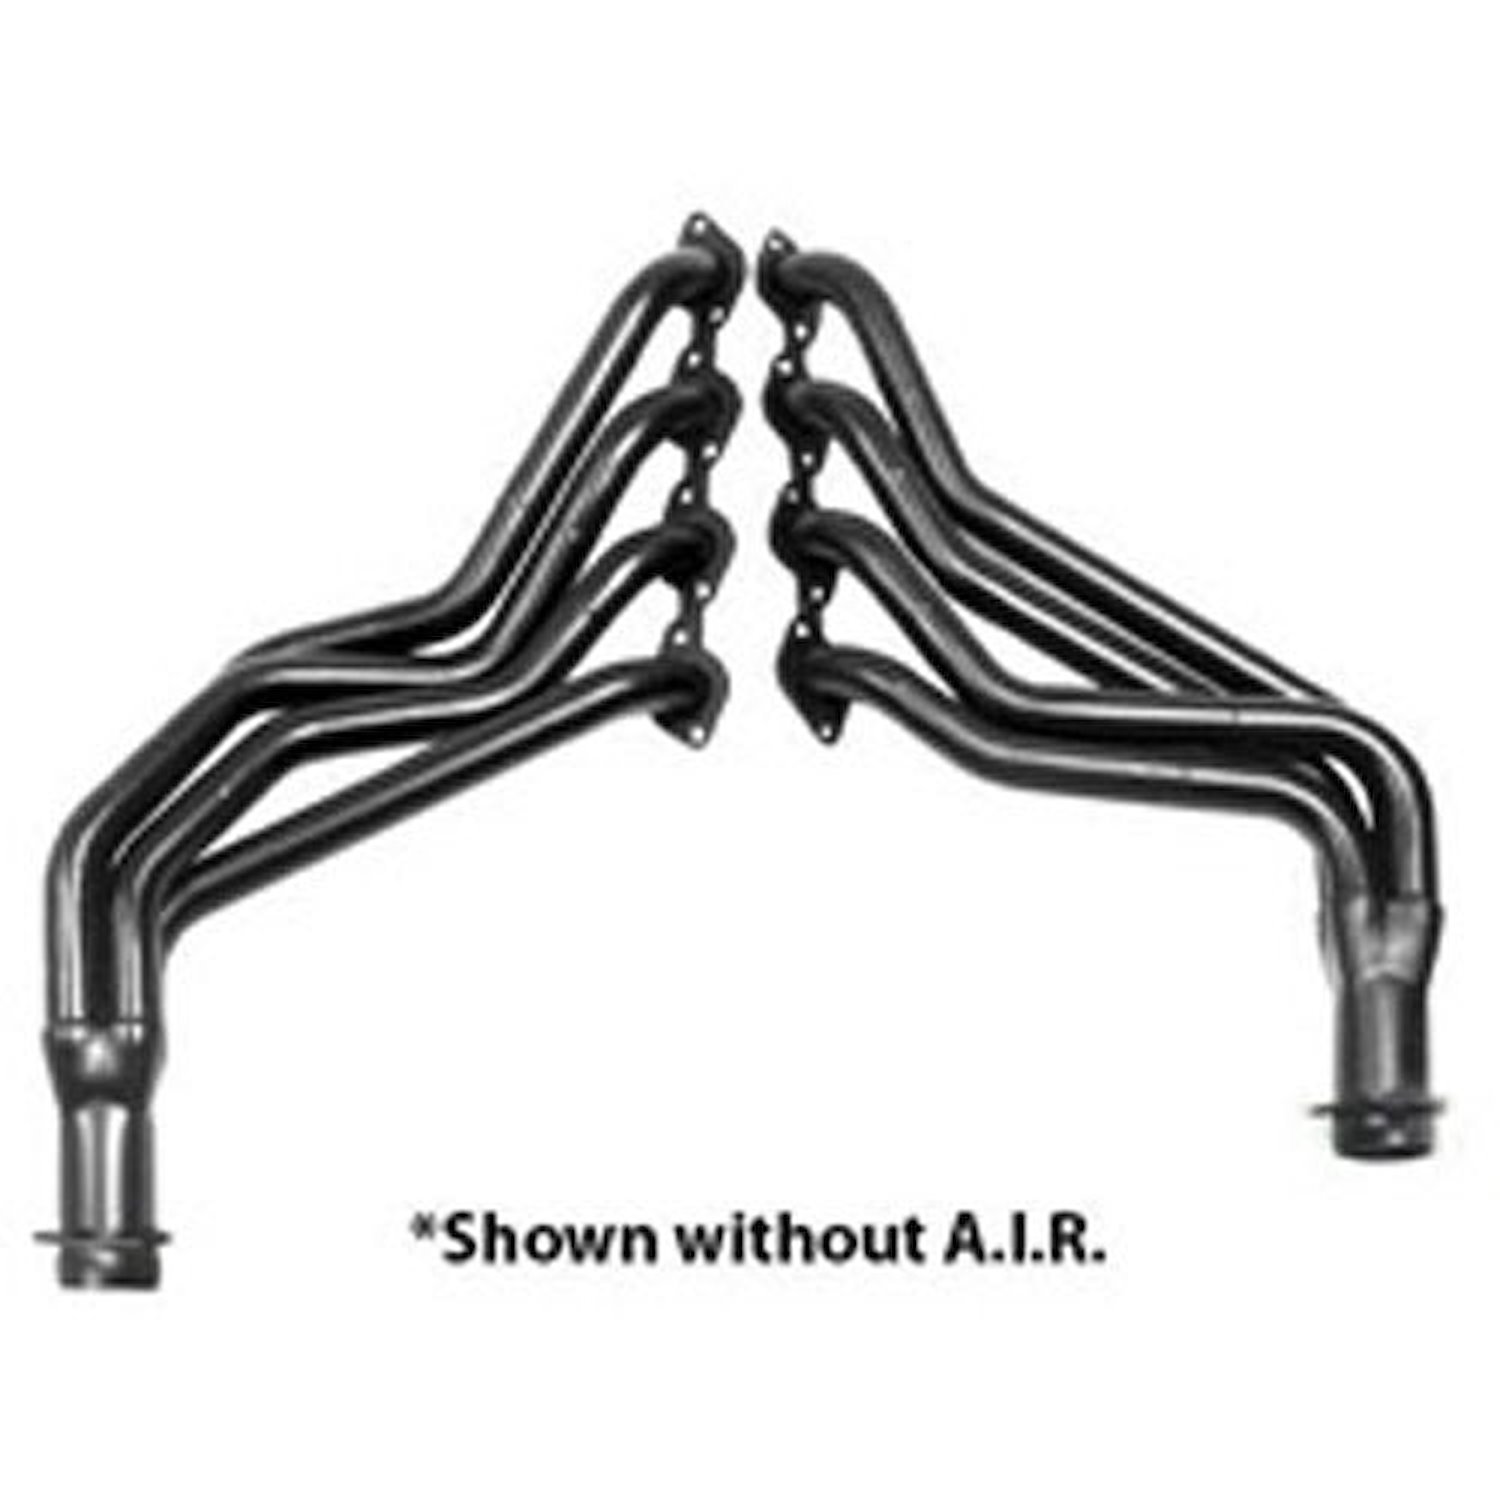 Standard Duty Uncoated Full Length Headers for 1975-95 P30 Van & Class A Motorhome 396-454